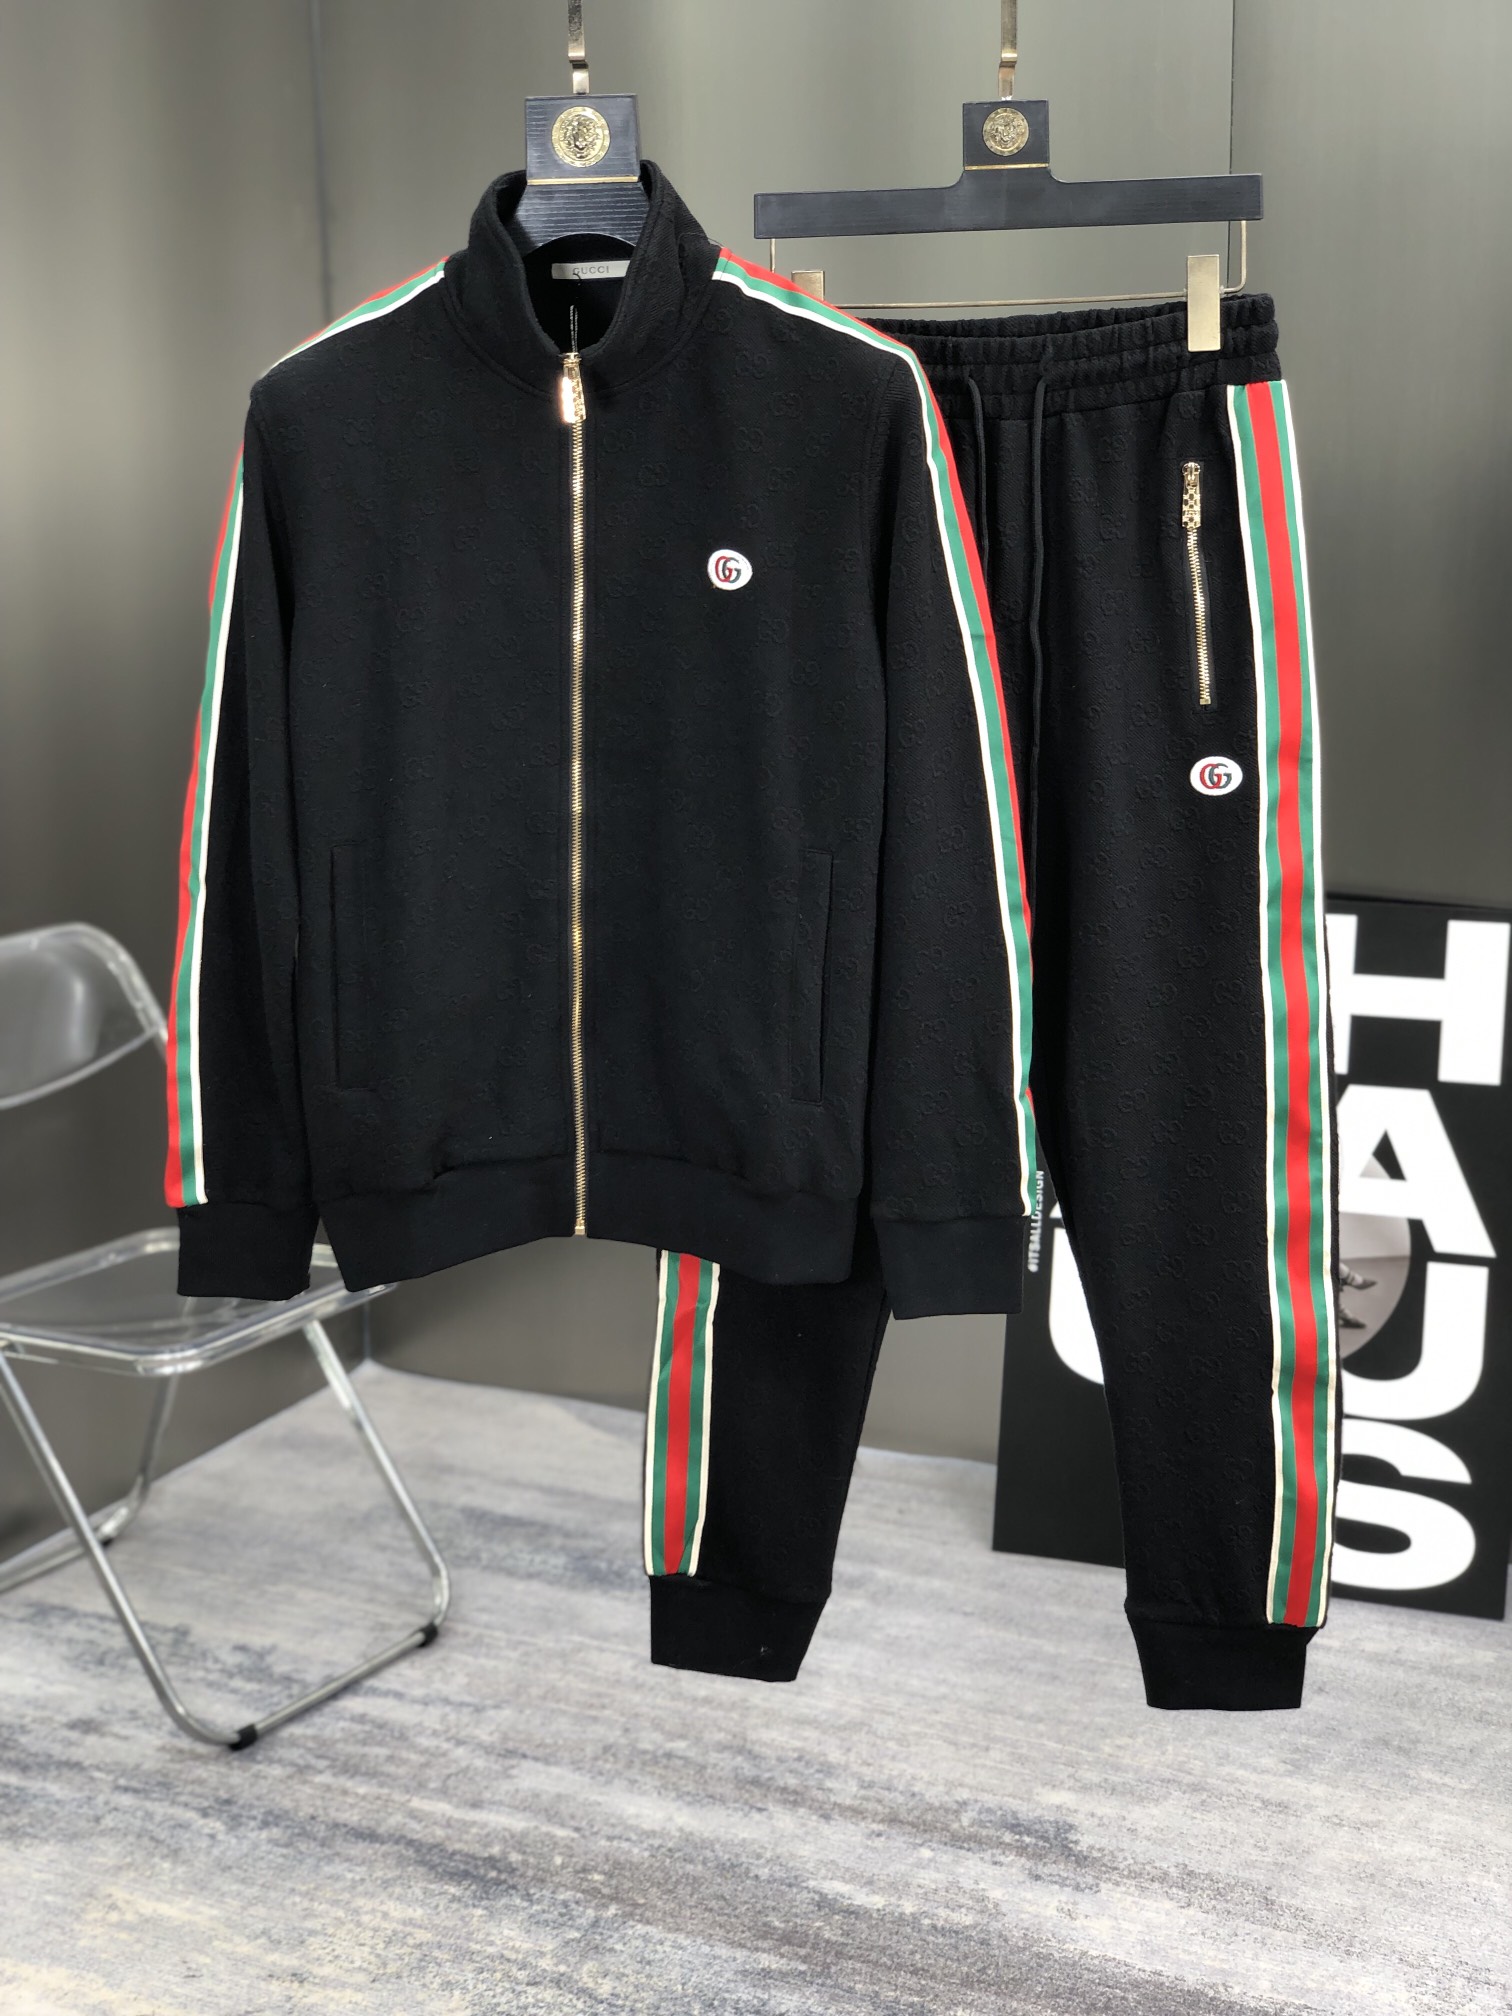 Online From China Designer Gucci Clothing Two Piece Outfits & Matching Sets Fall/Winter Collection Fashion Hooded Top